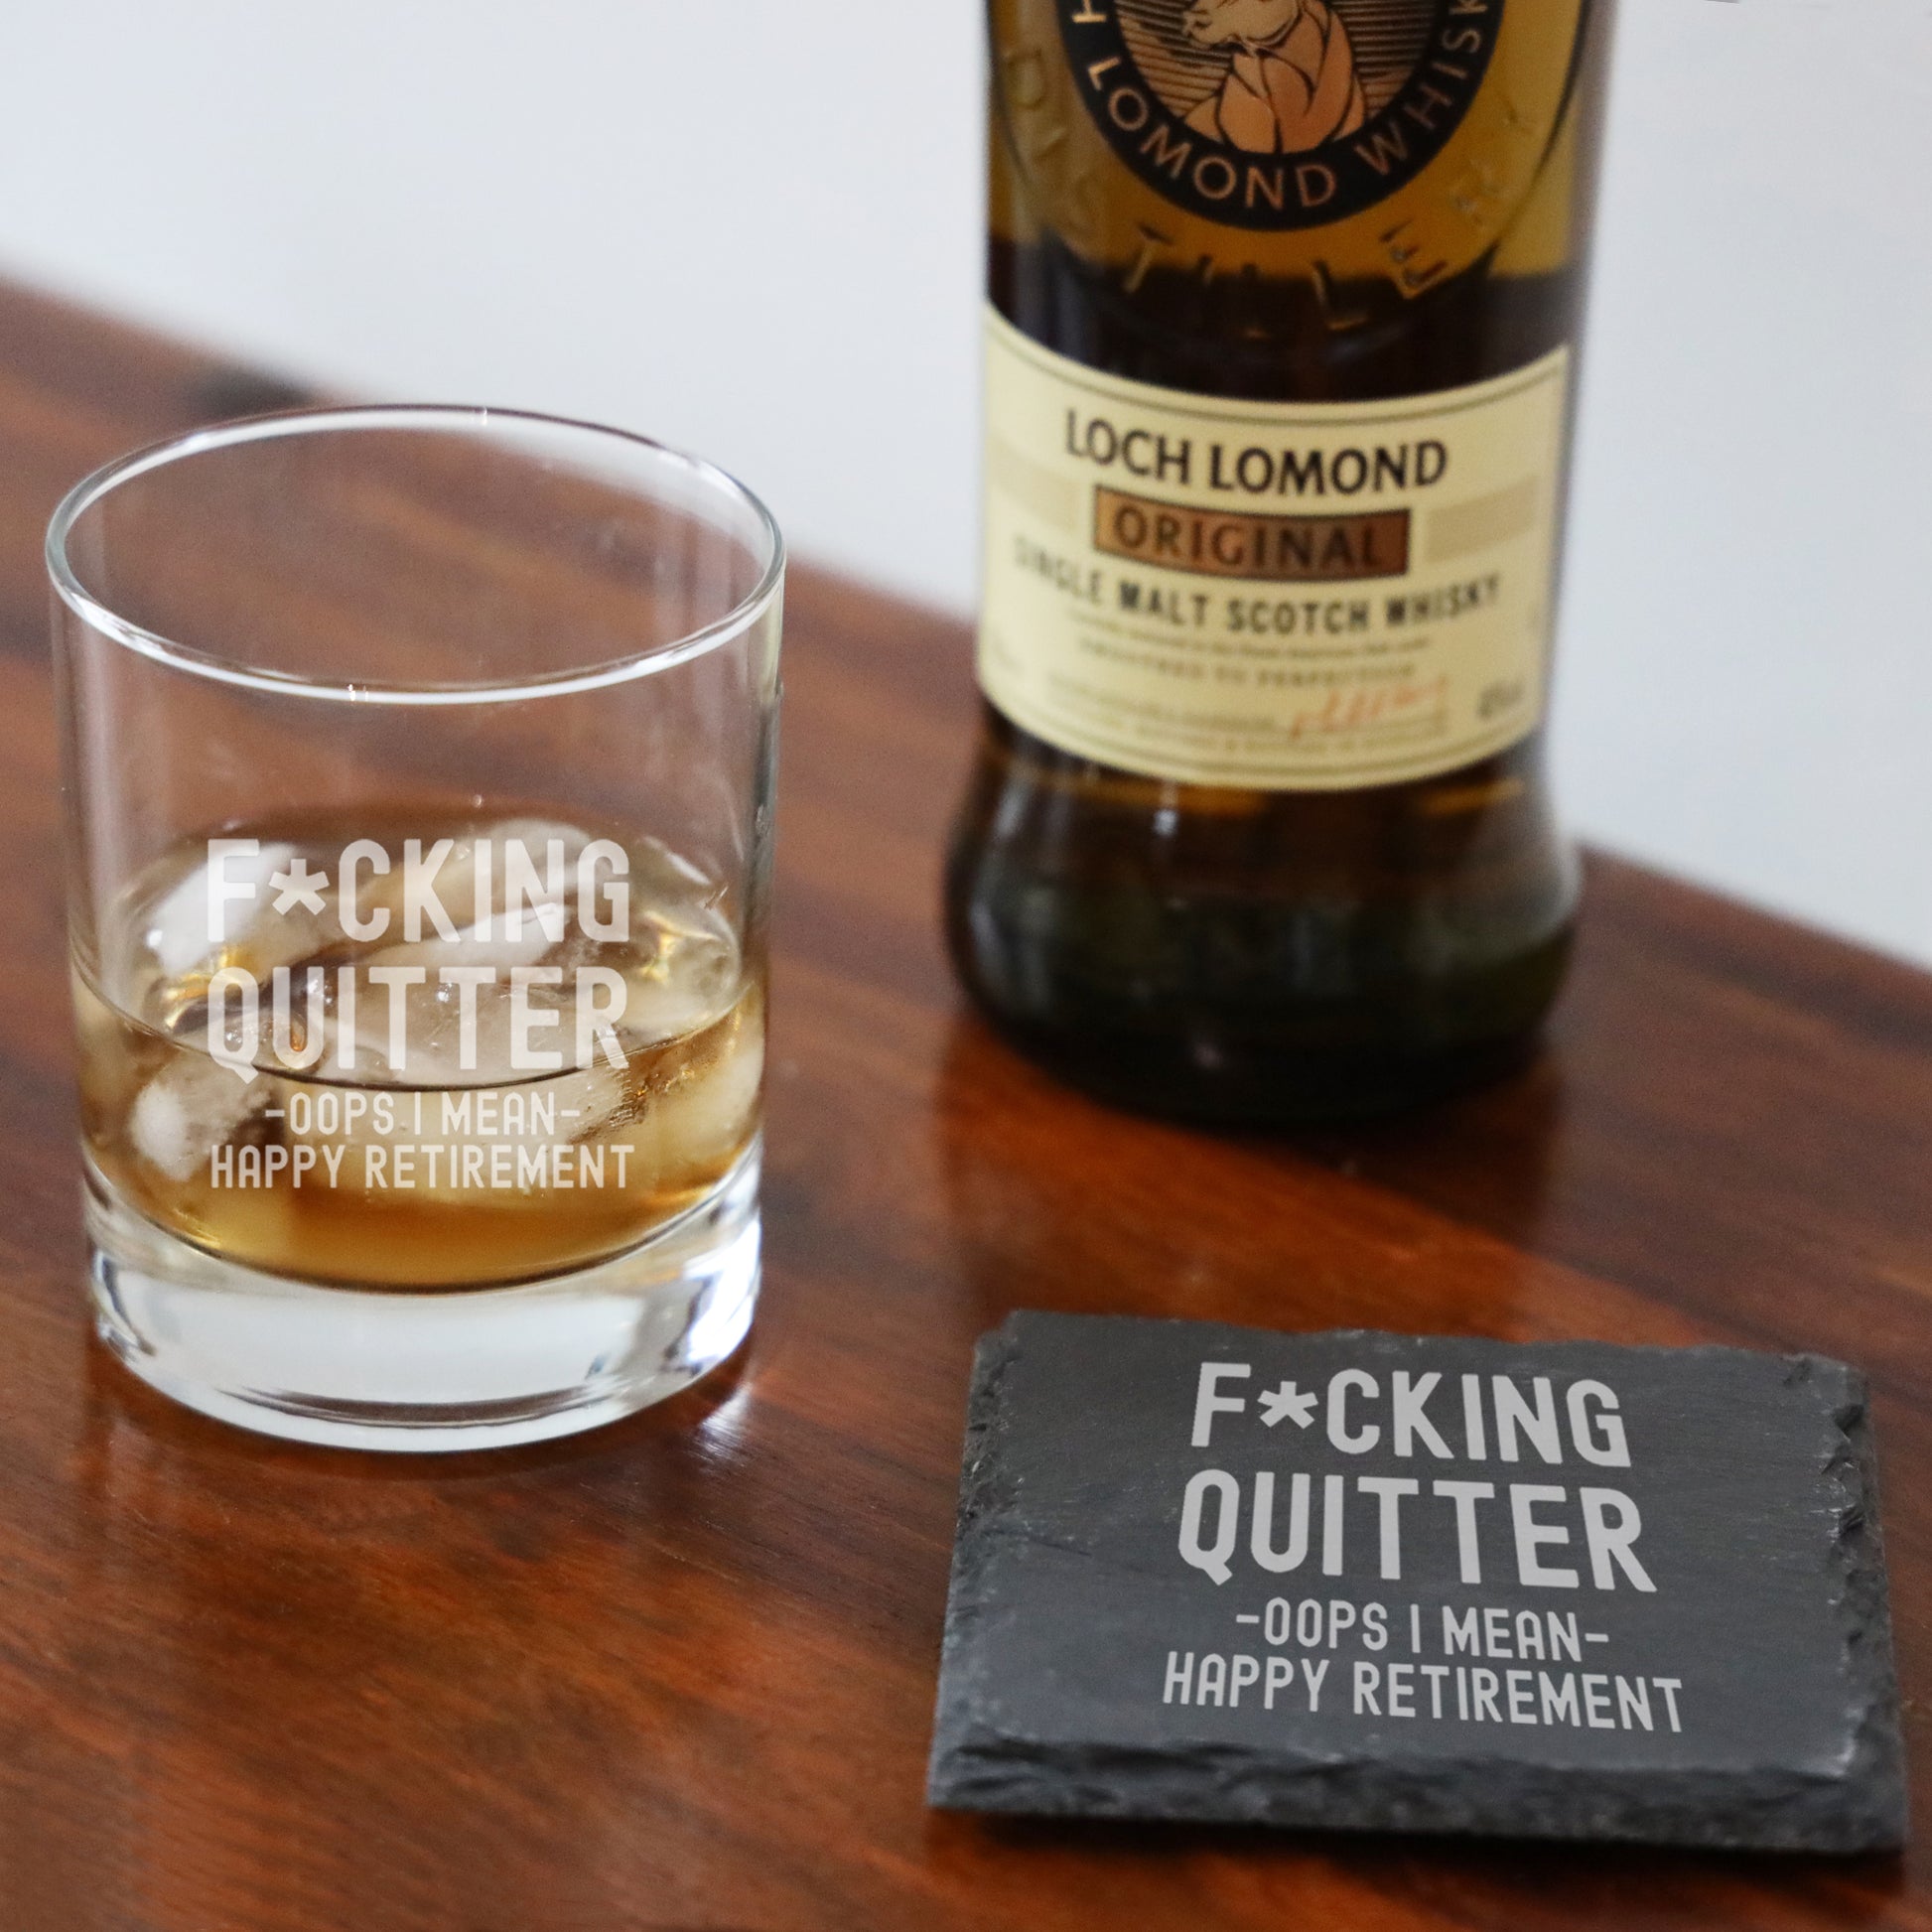 Engraved Funny "F*cking Quitter, Oops I mean Happy Retirement" Whisky Glass and/or Coaster Novelty Gift  - Always Looking Good -   